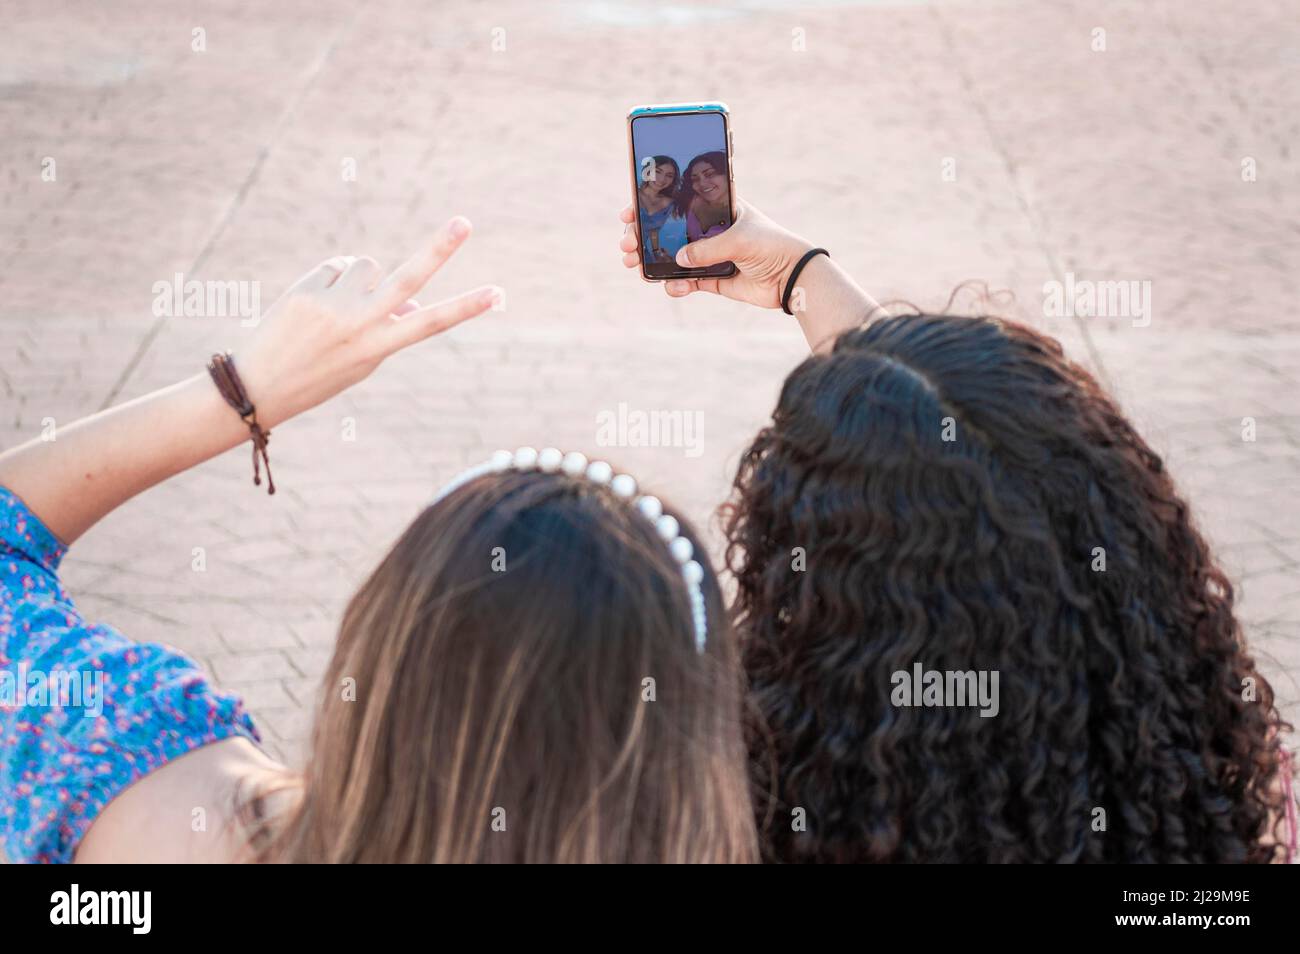 Two pretty girls taking a selfie, two latin girls smiling and taking a selfie, female friendship concept Stock Photo